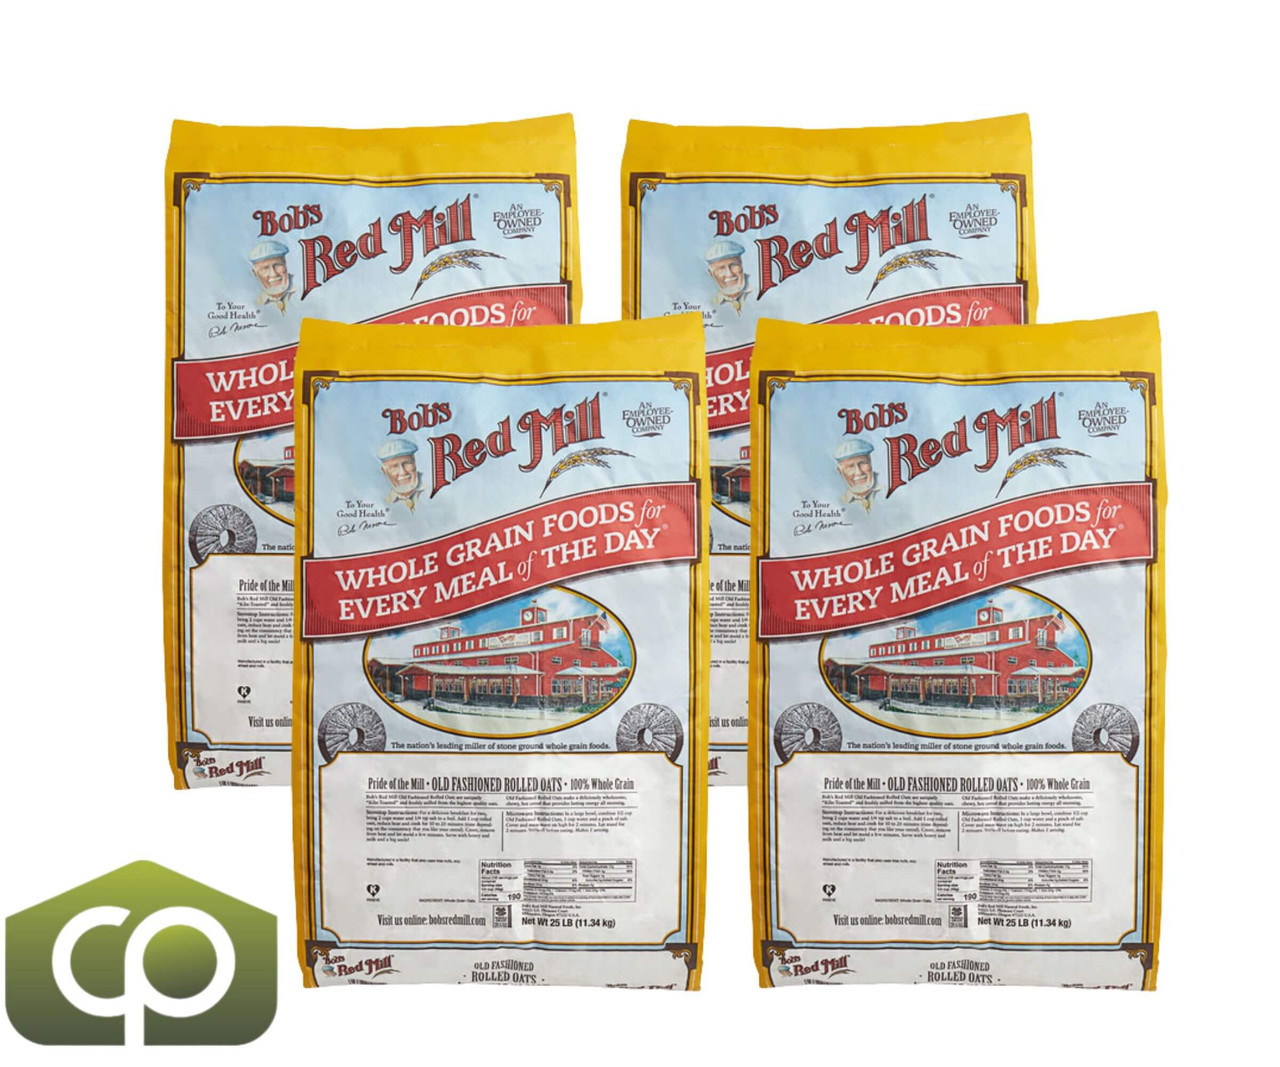 Bob's Red Mill 25 lb. (11.34 kg) Whole Grain Rolled Oats (60 BAGS/PALLET) - Chicken Pieces